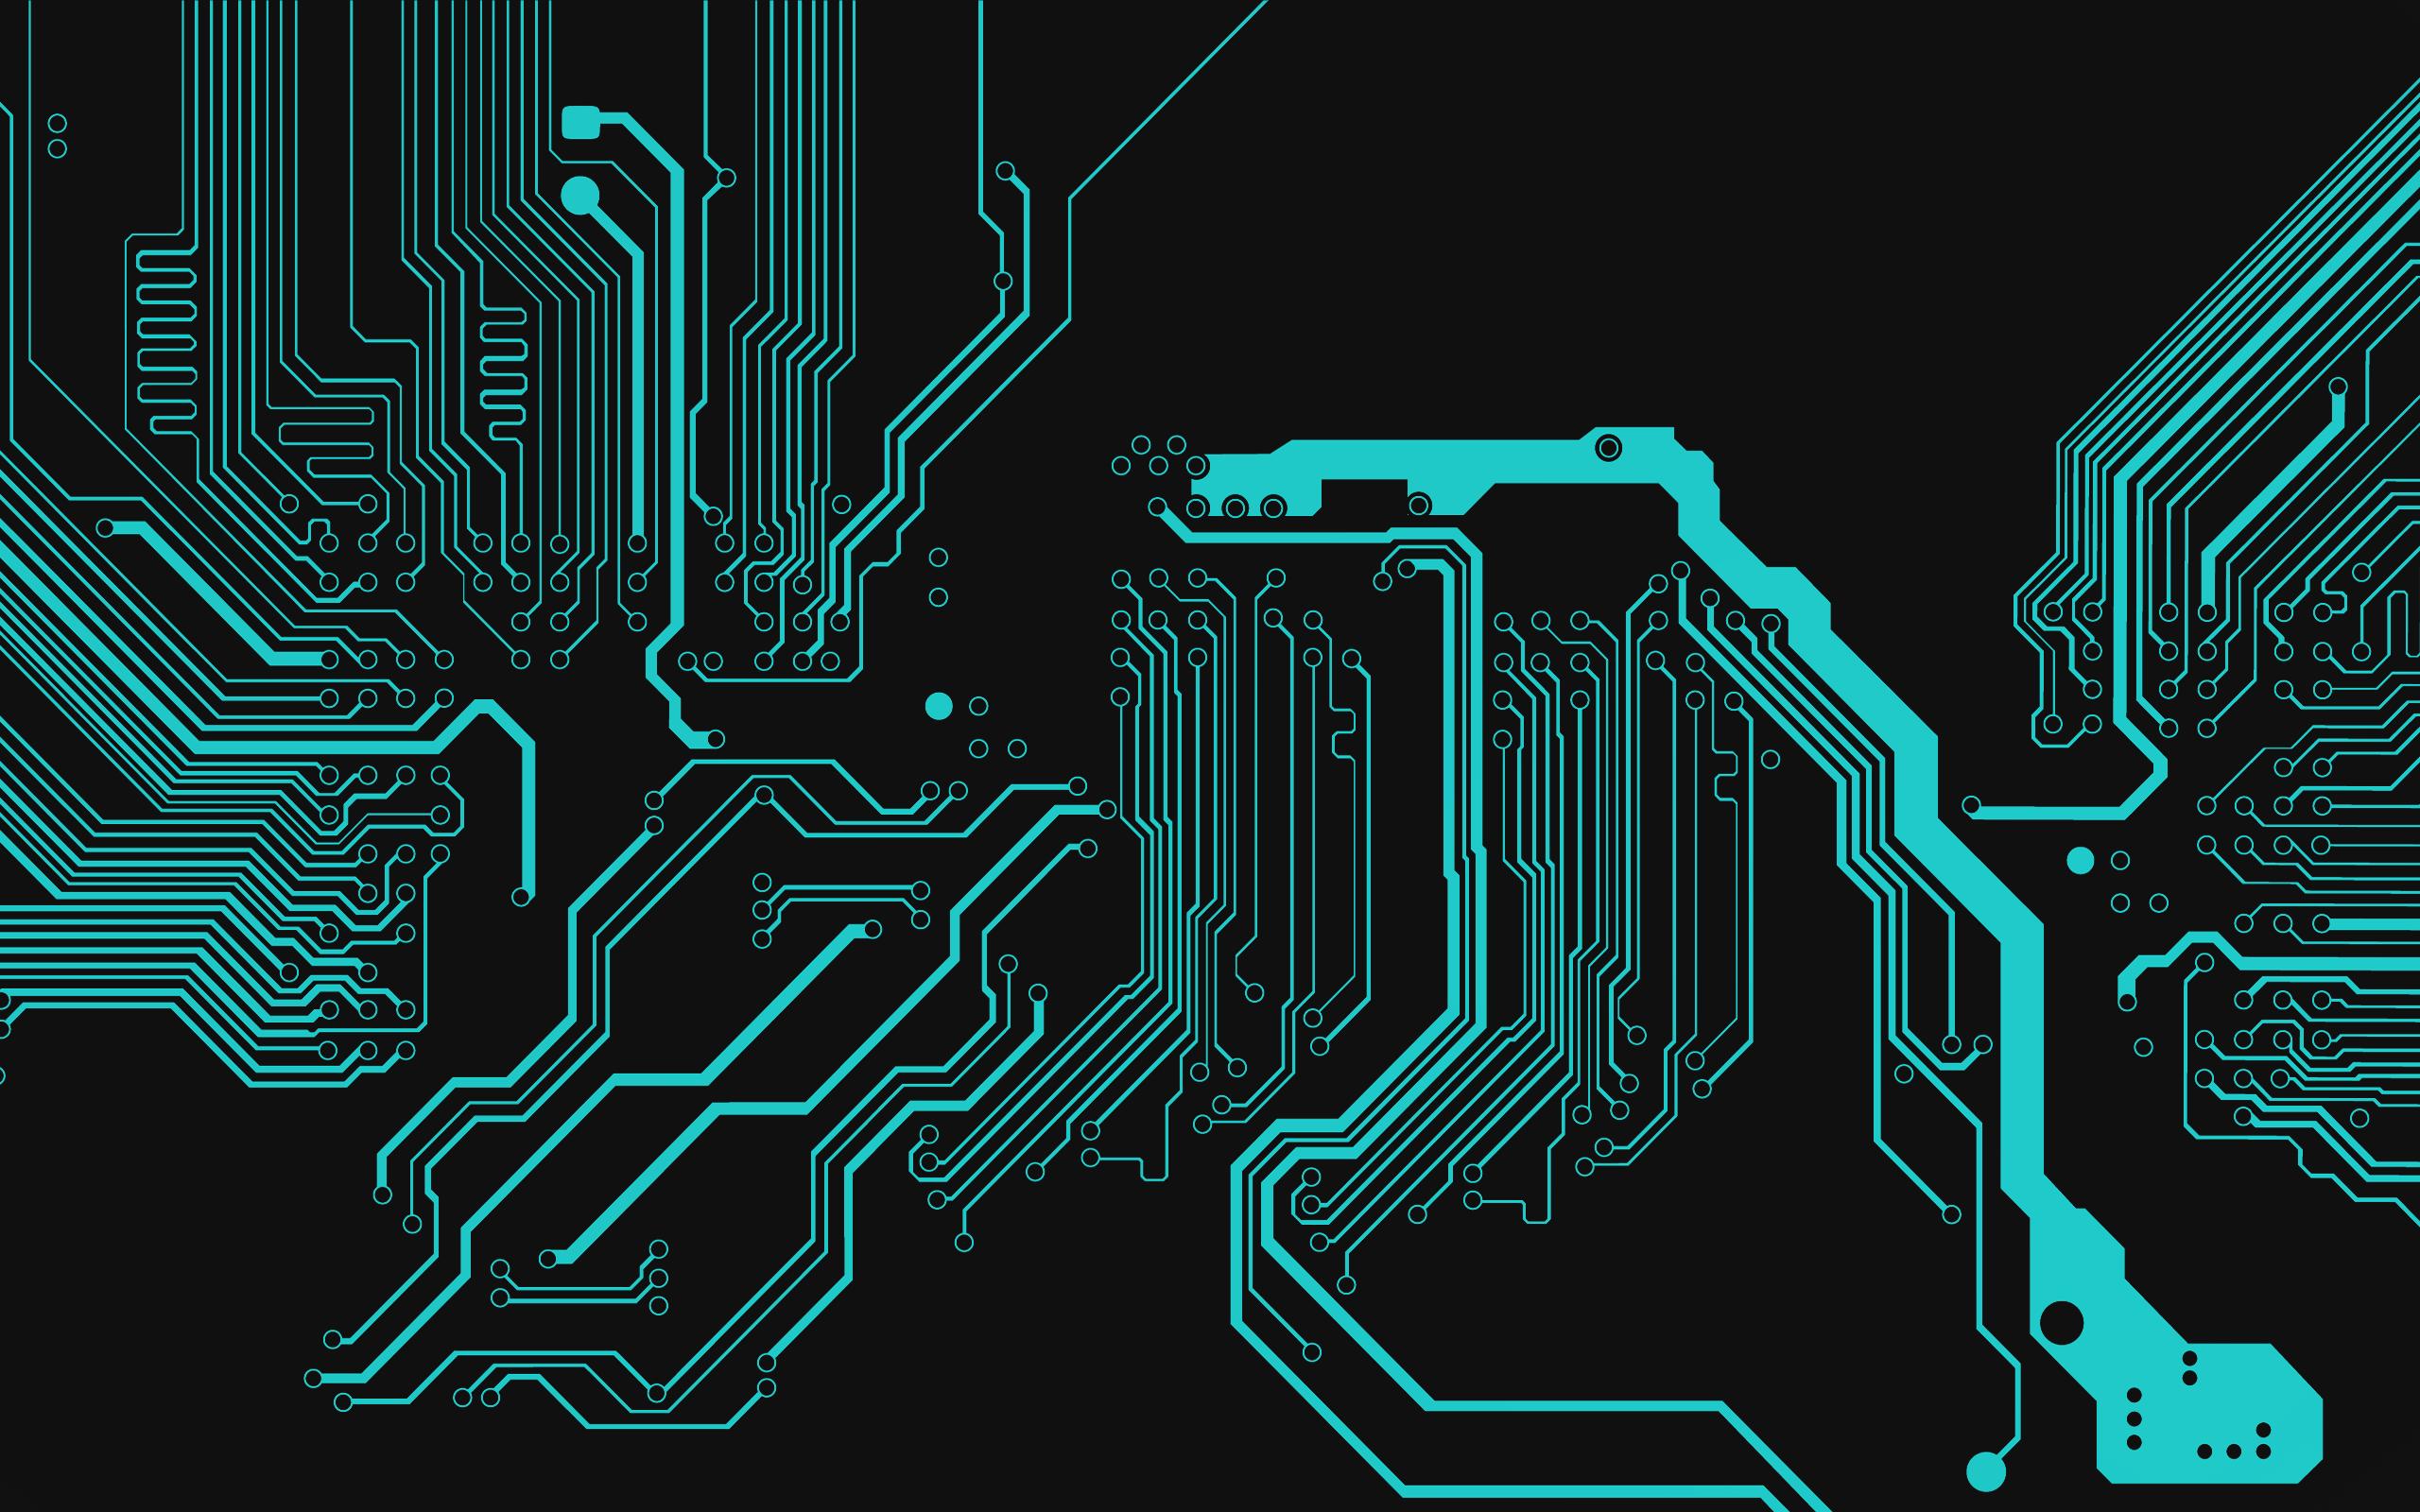 General 2560x1600 minimalism electronic abstract digital art black dark background circuit technology turquoise circuitry